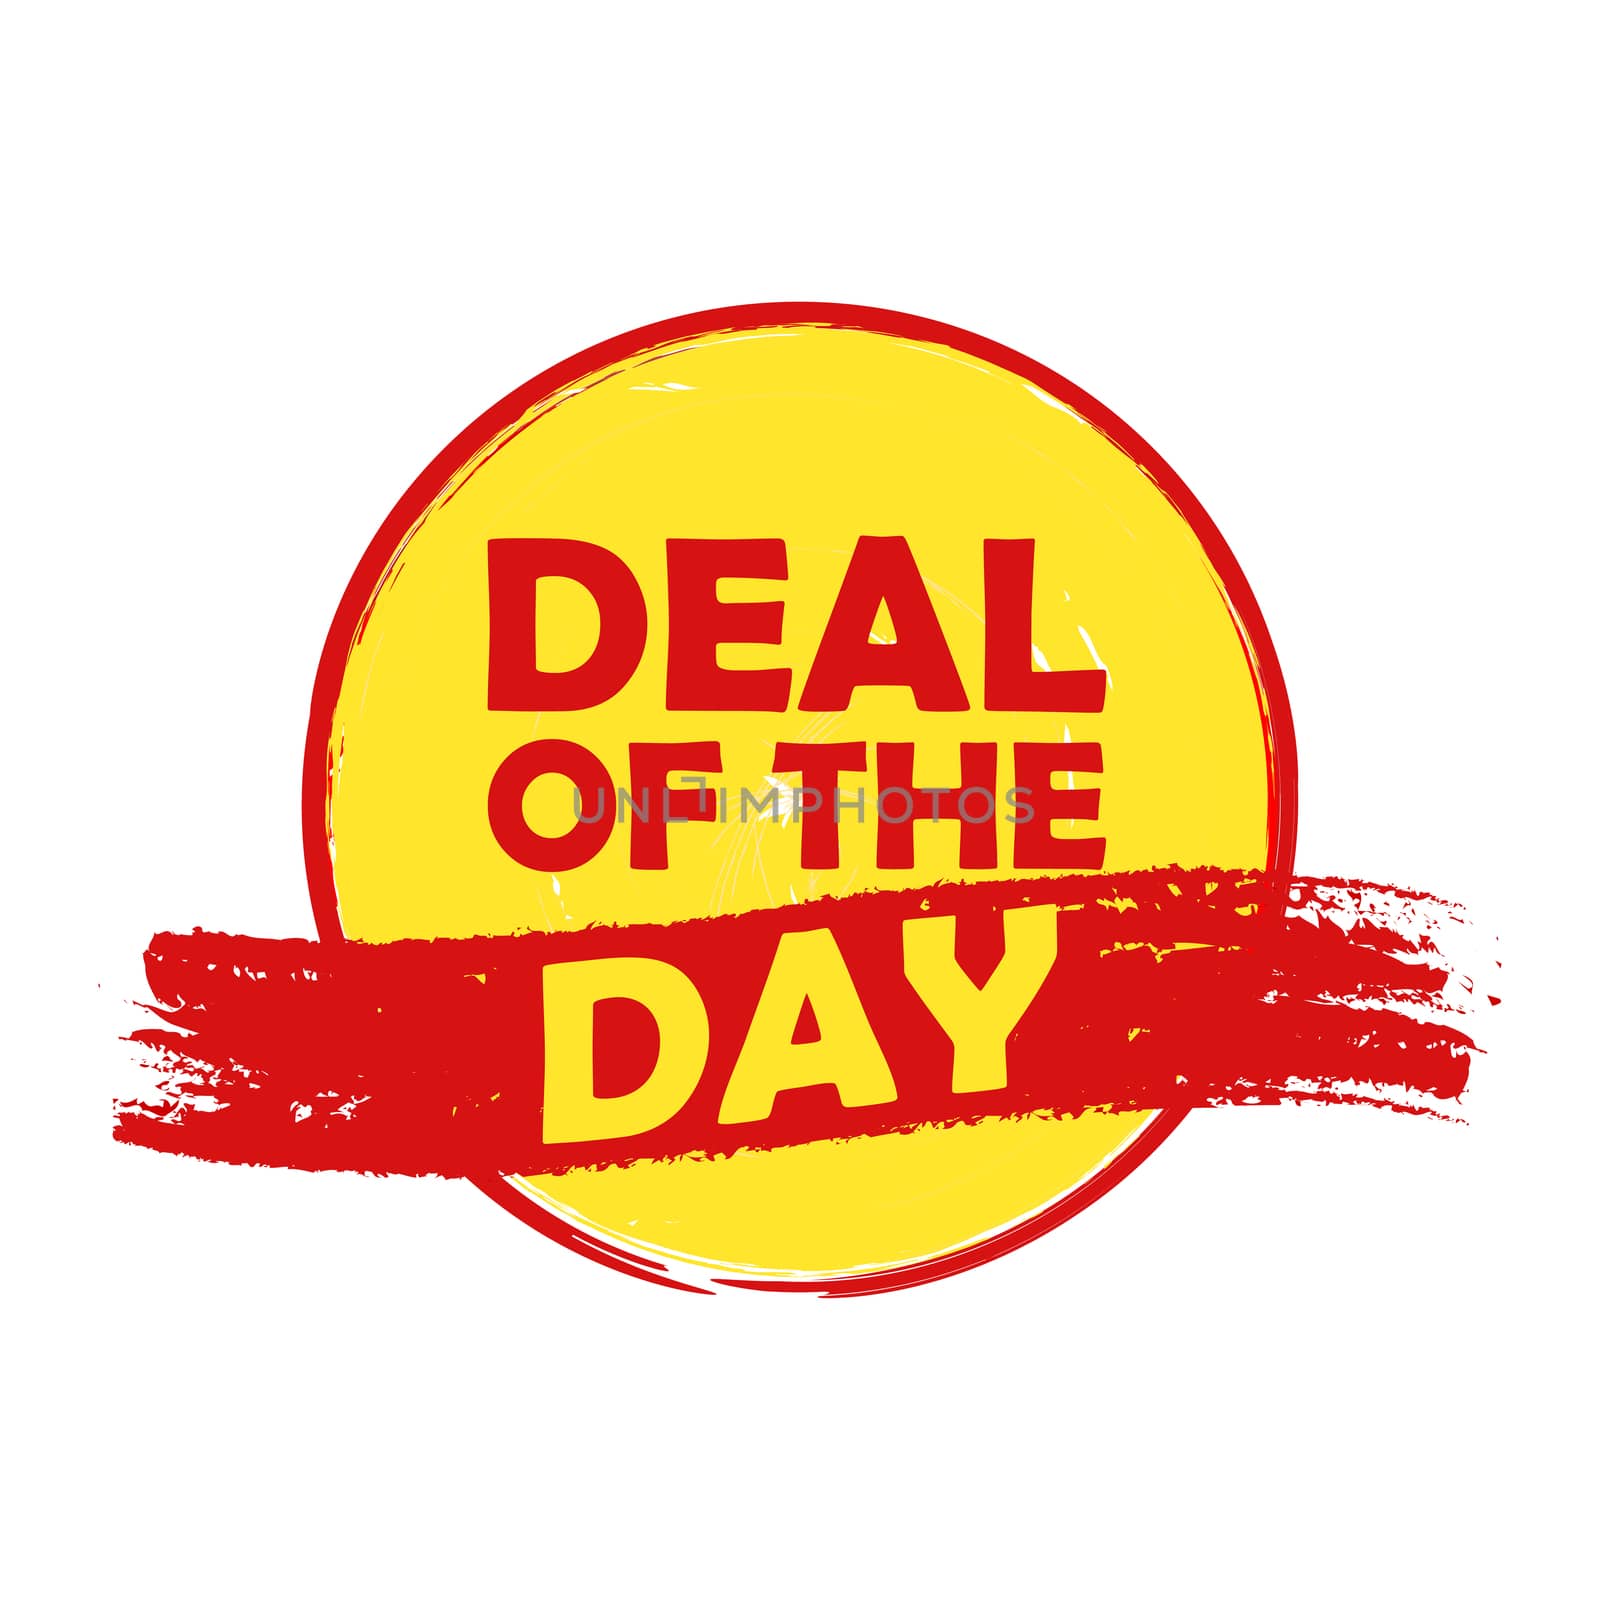 deal of the day drawn label - text in red and yellow round banner, business shopping concept